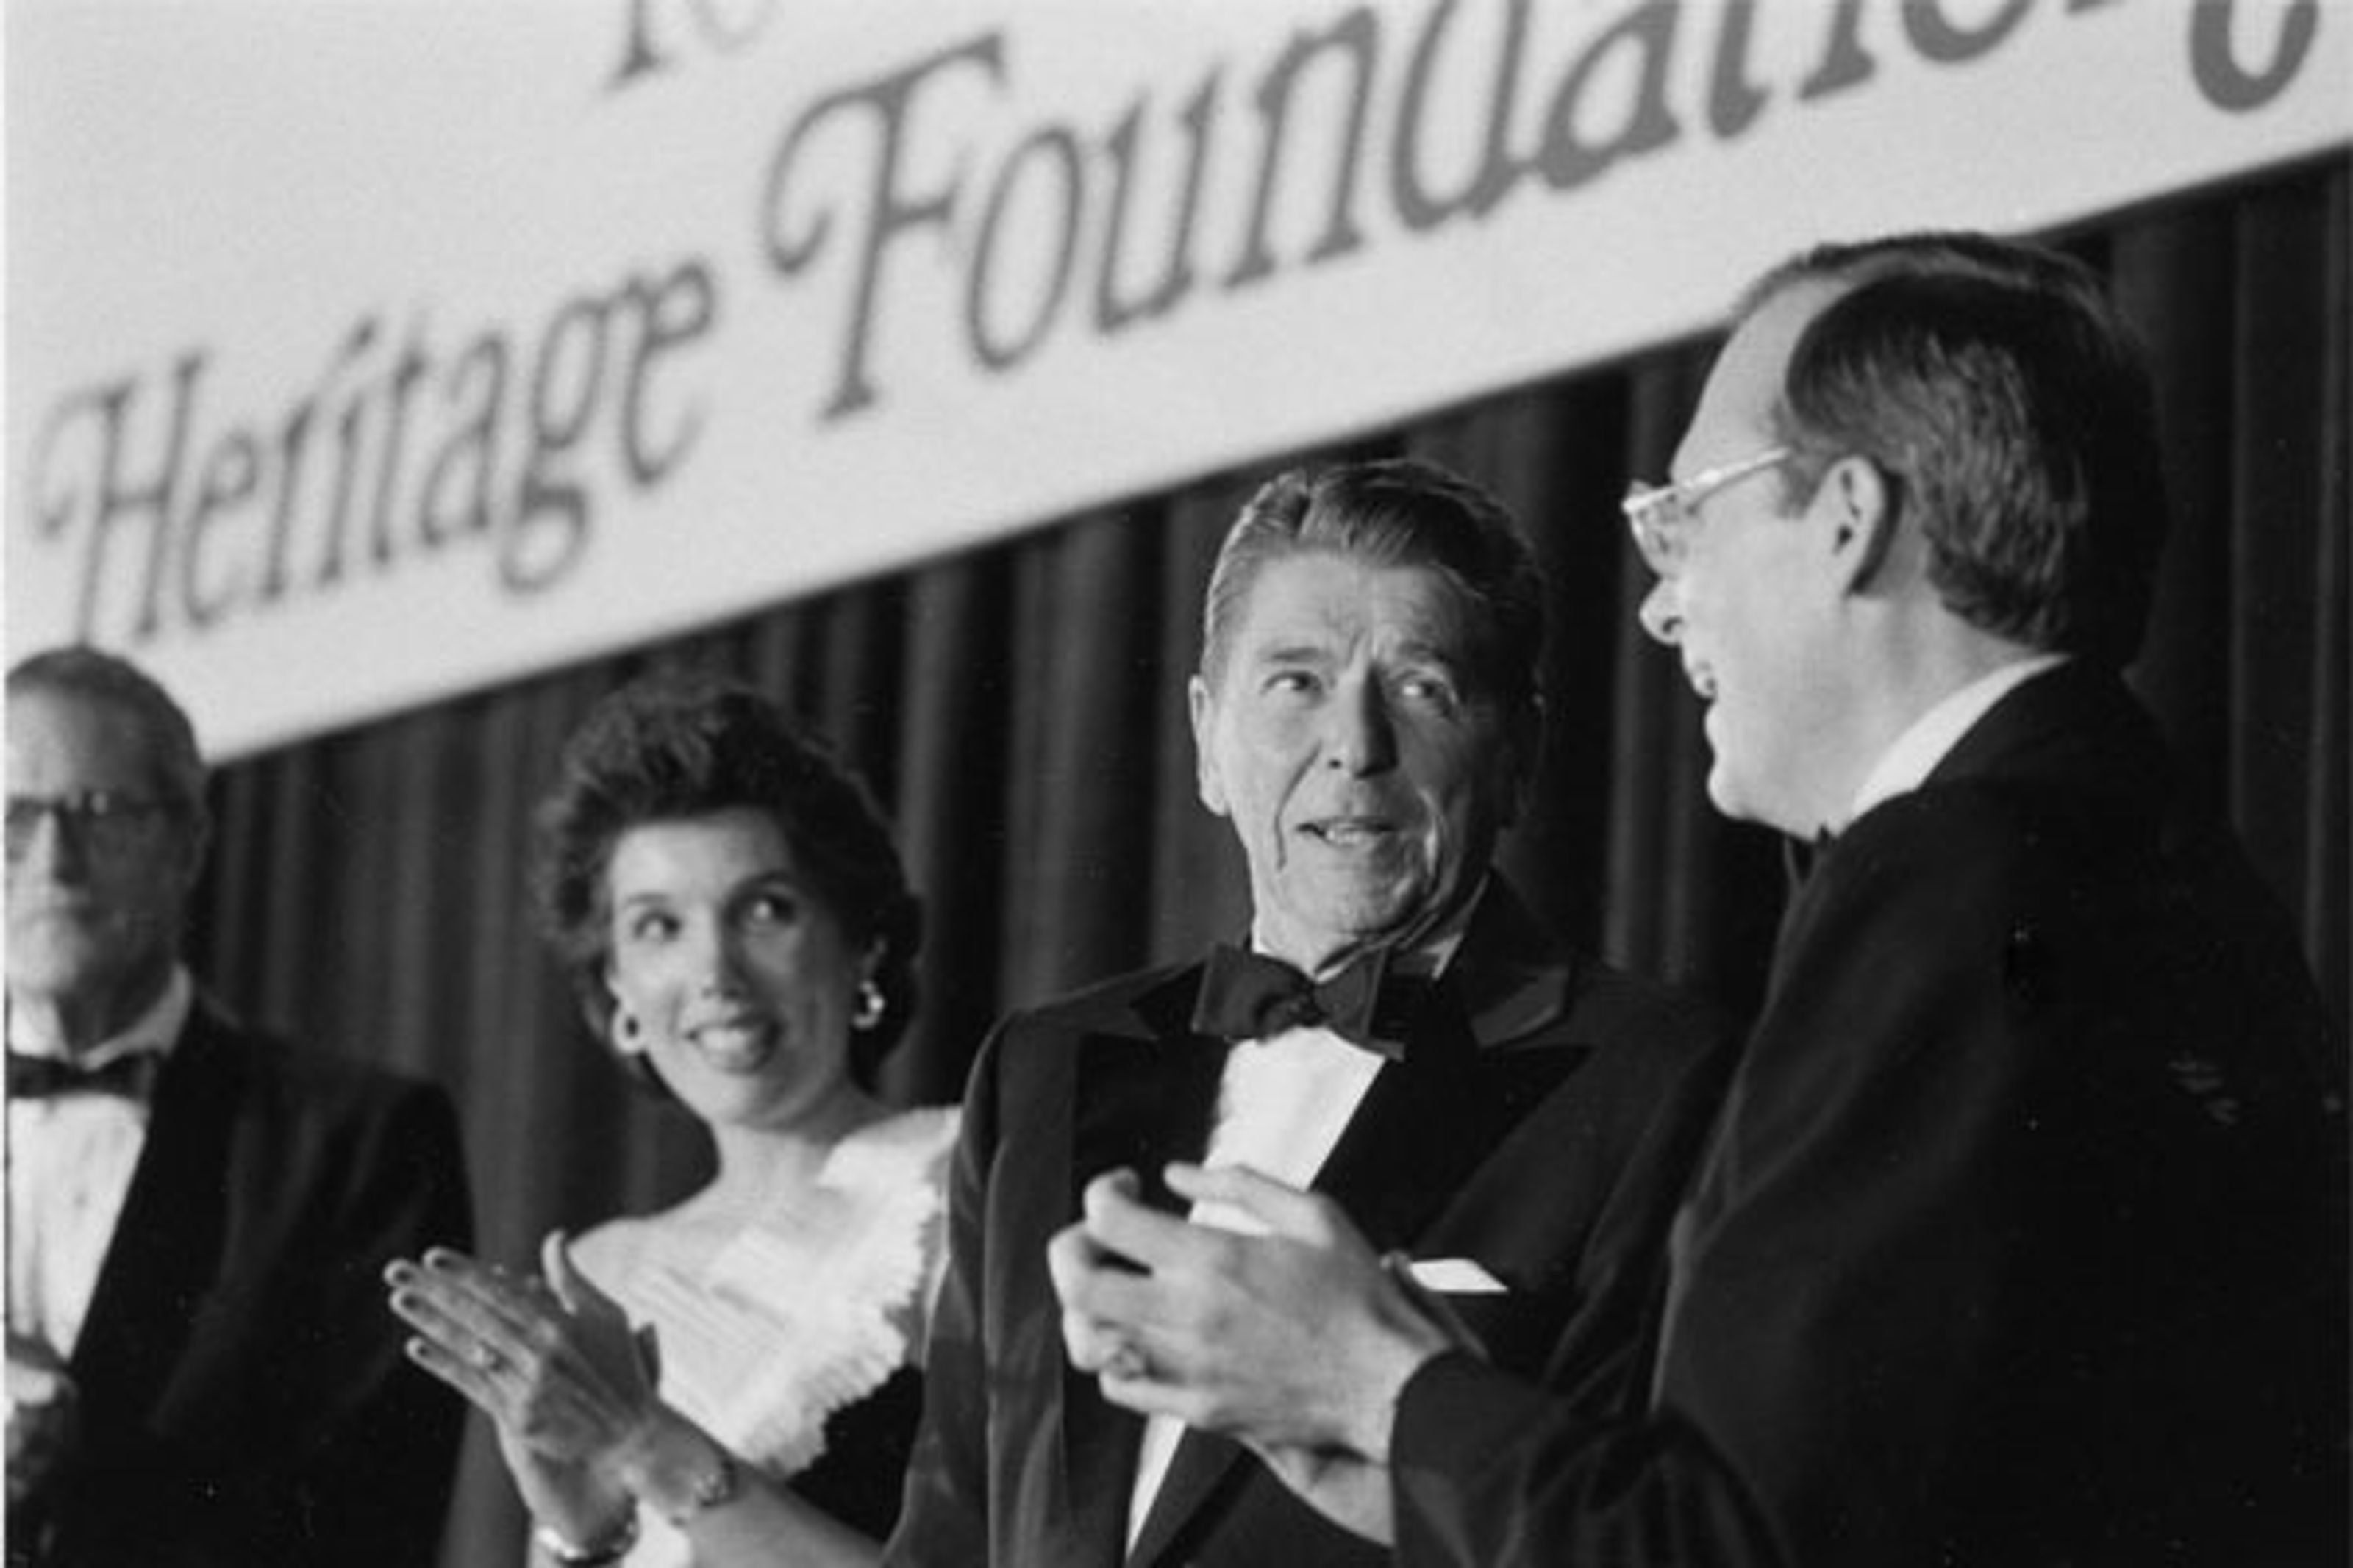 U.S. President Reagan and Heritage founder Ed Feulner (right) at the Heritage Foundation's 10th anniversary gala in 1983